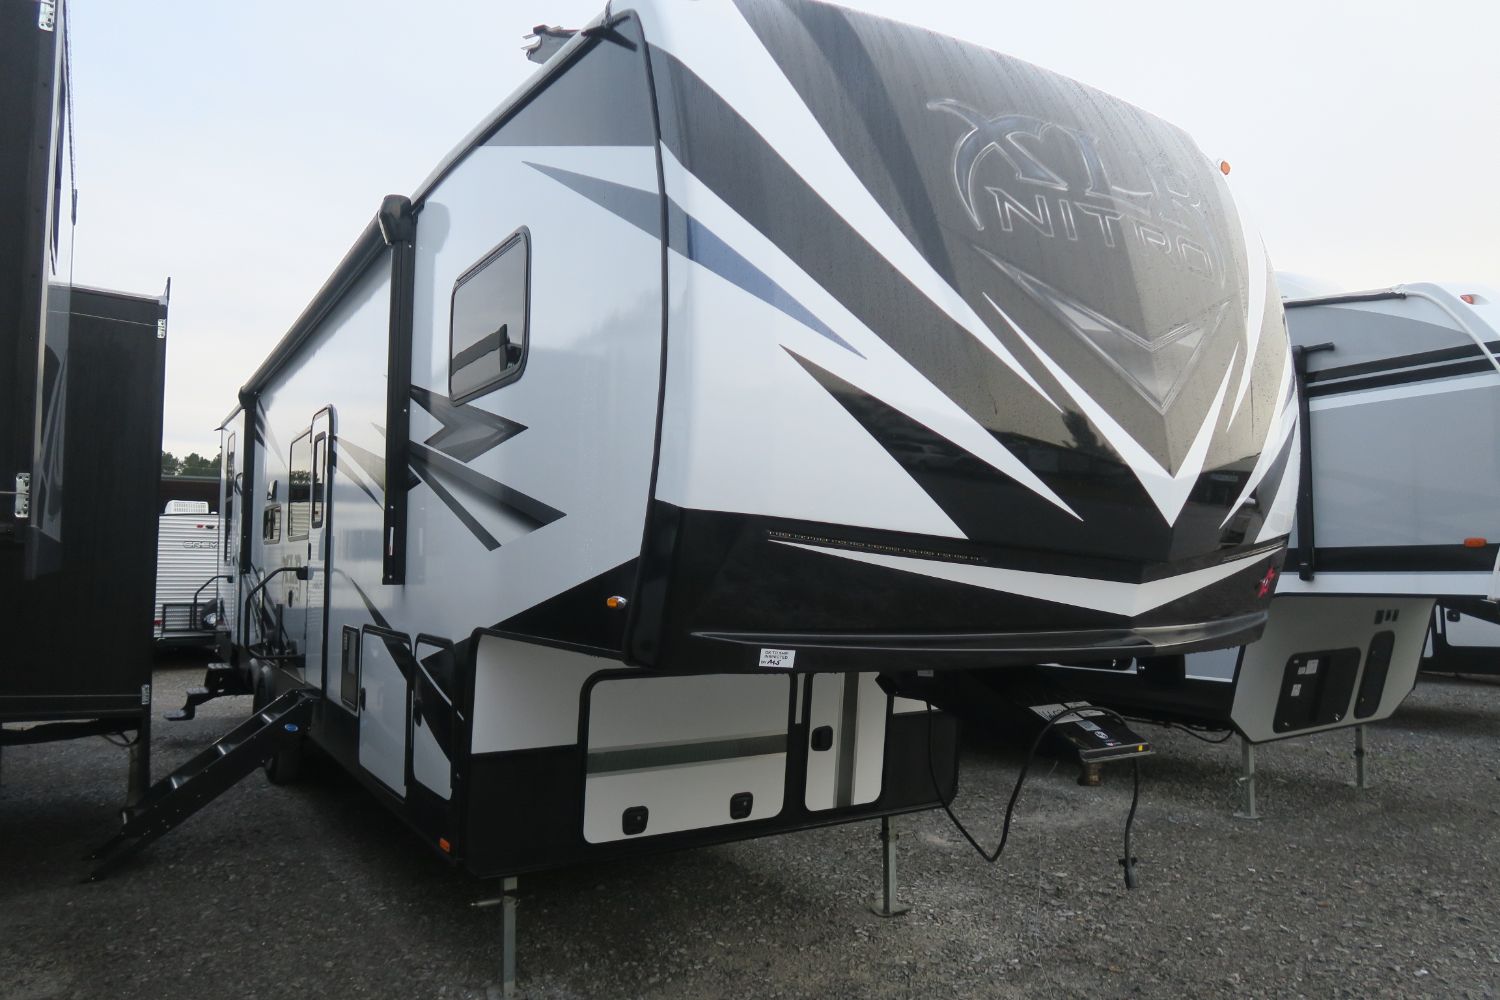 NEW 2019 XLR NITRO 33DK5 - Overview | Berryland Campers